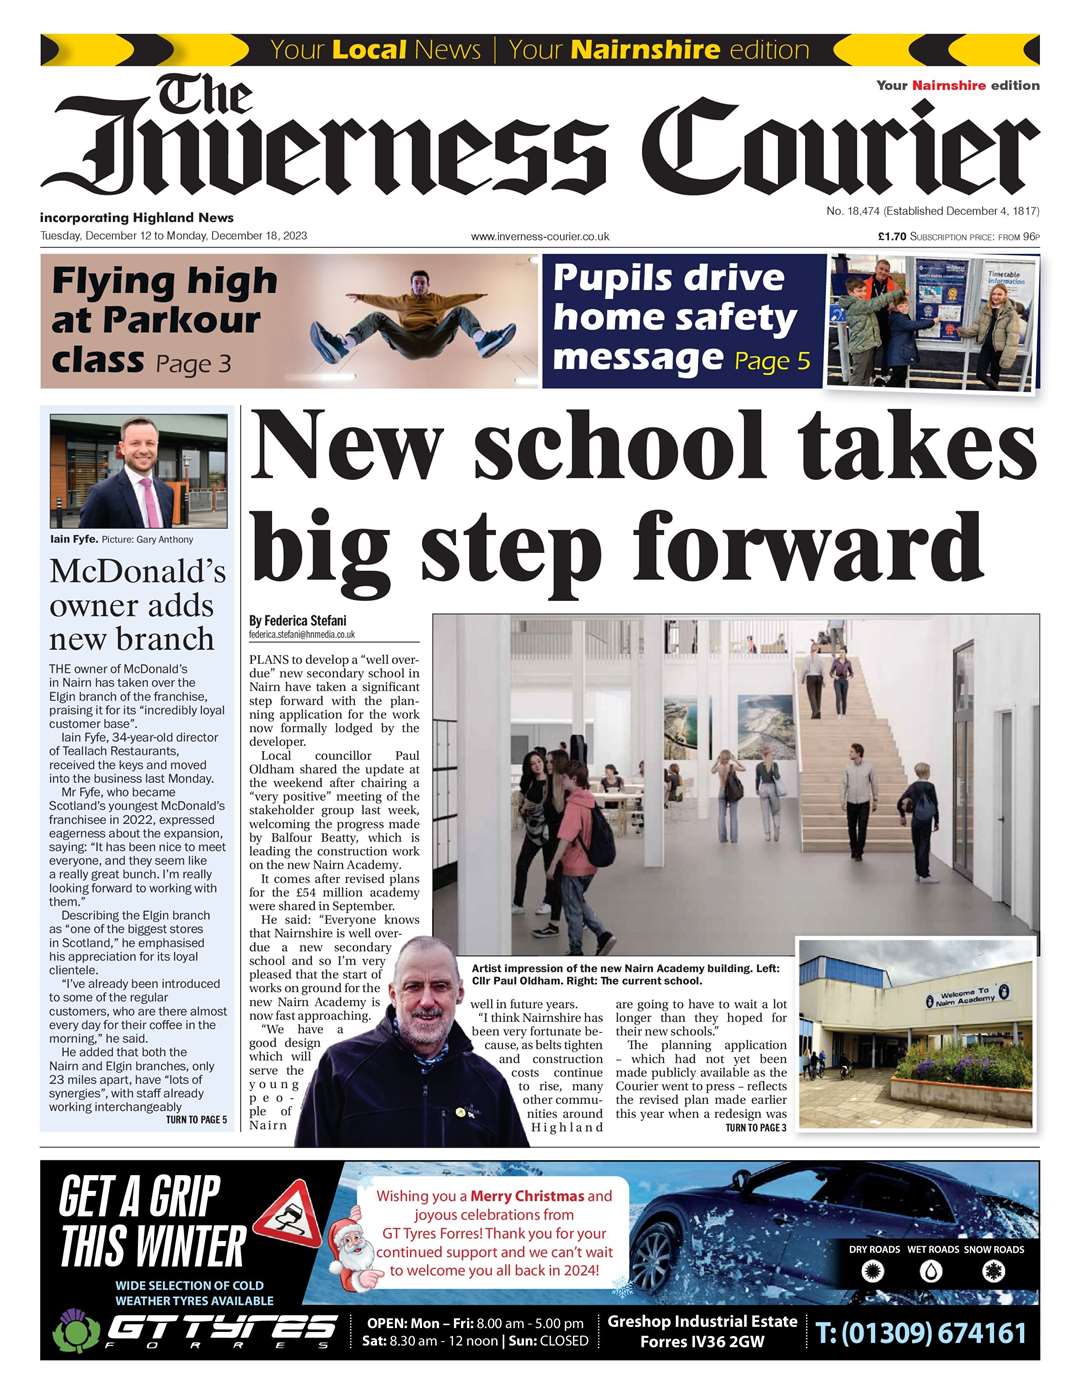 The Inverness Courier (Nairnshire edition), December 12, front page.